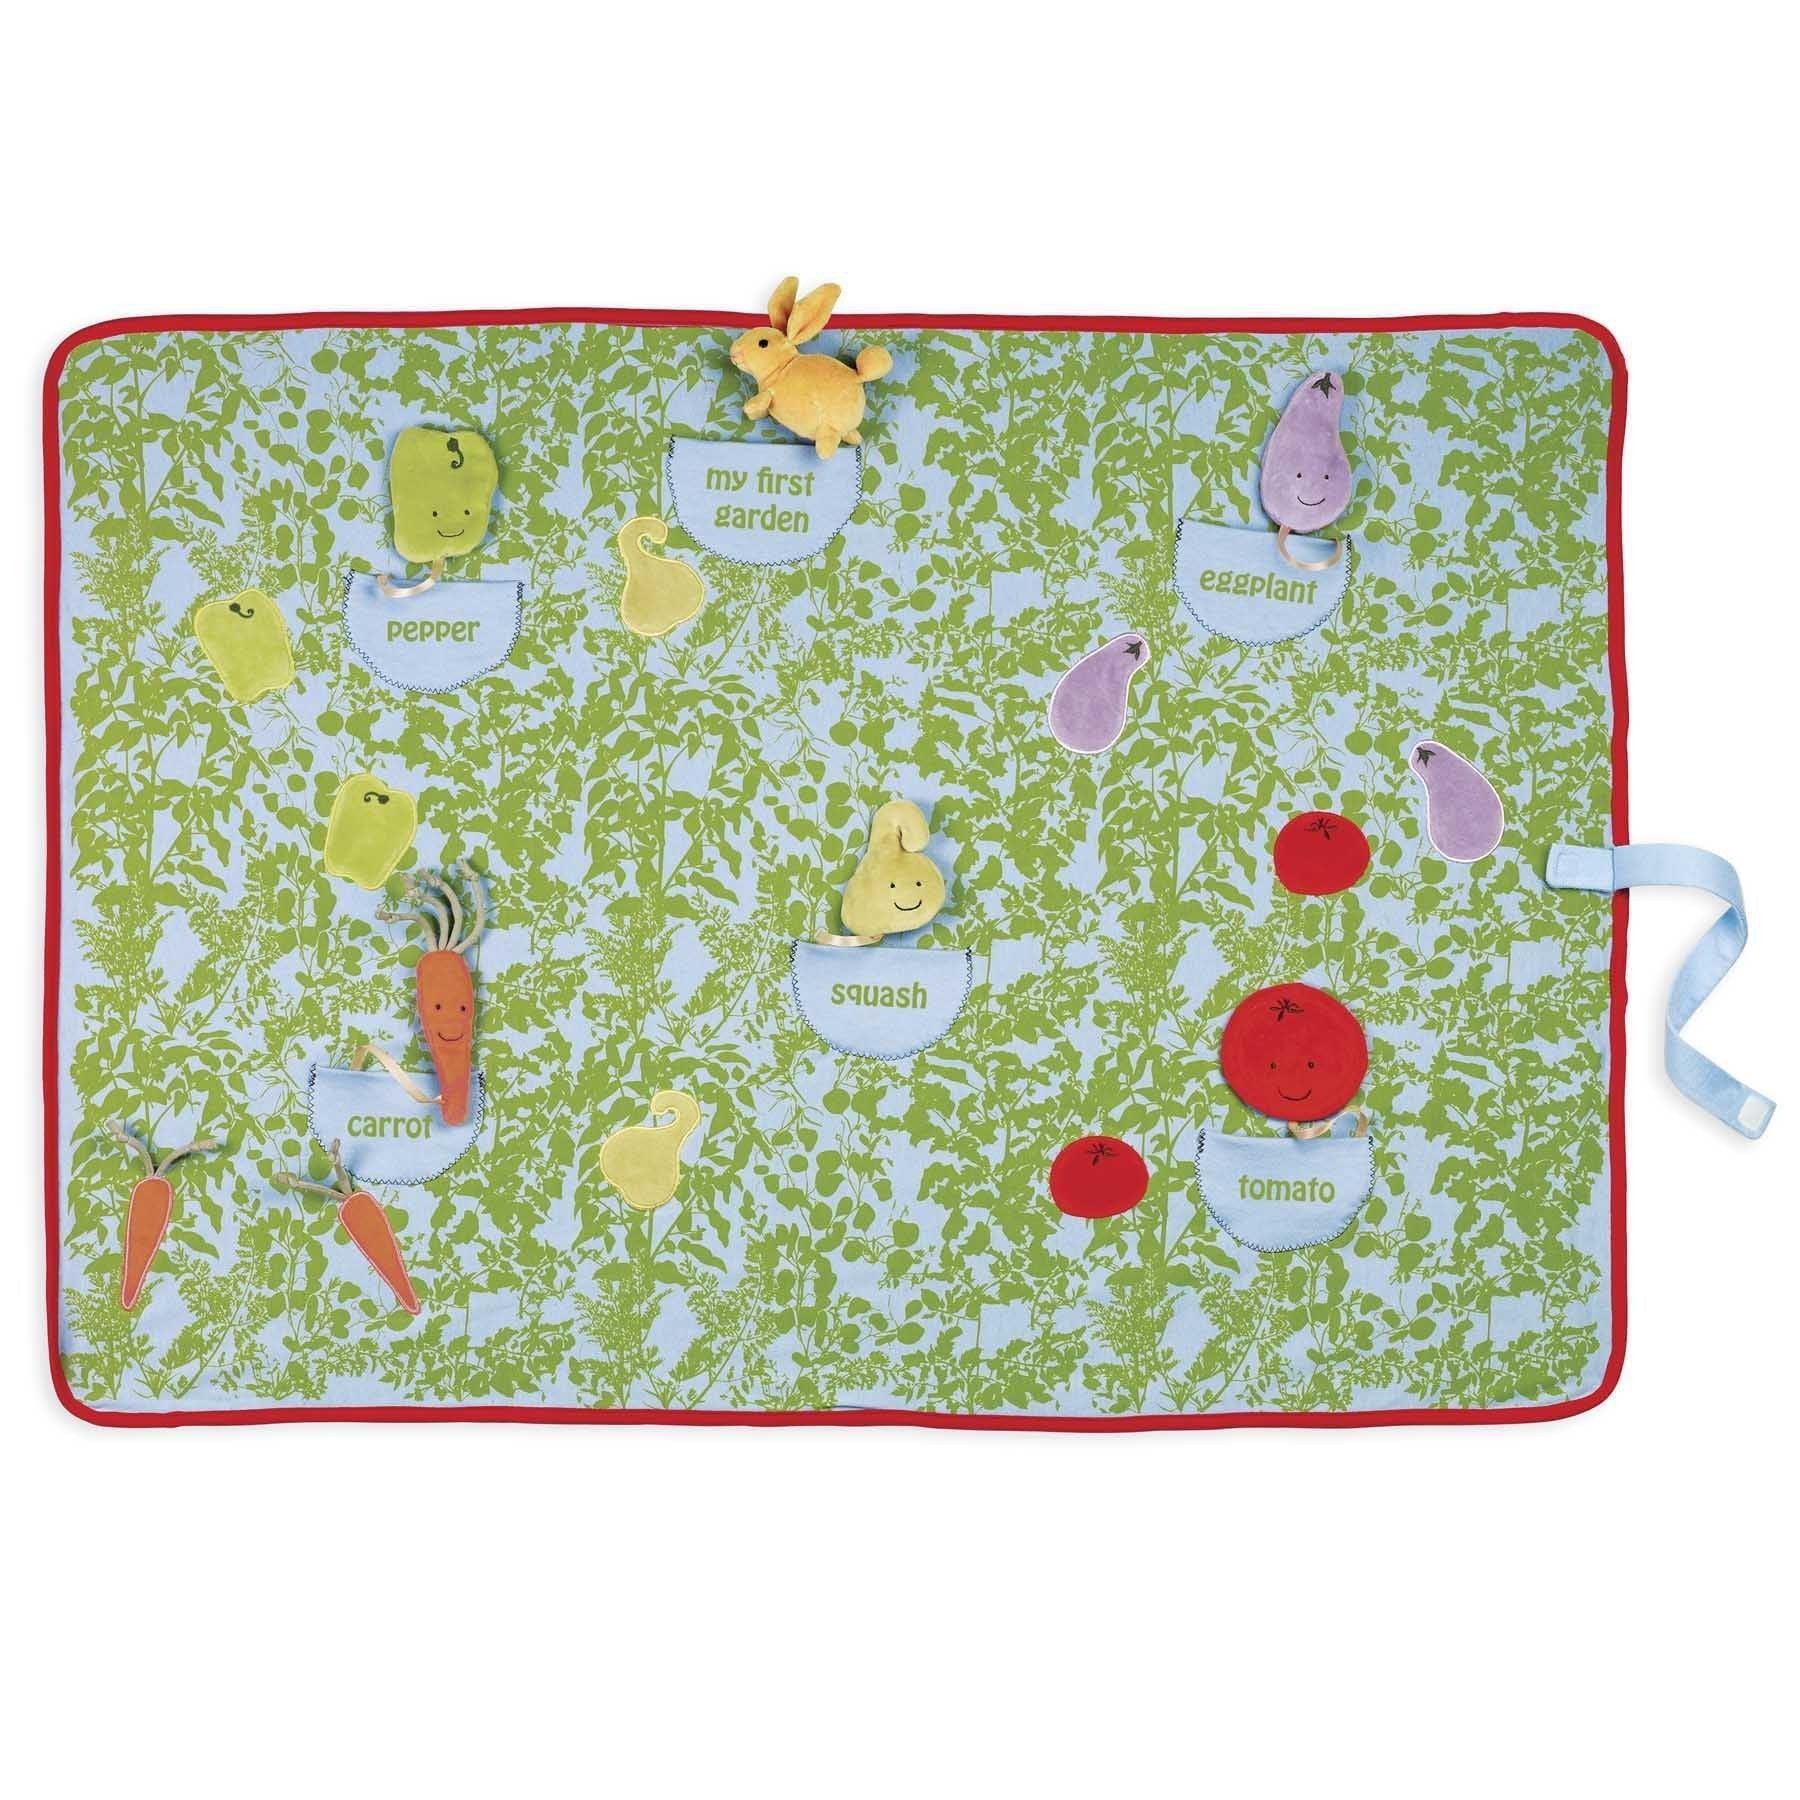 Garden Hop Activity Blanket Mat by North American Bear Co., 36-inches